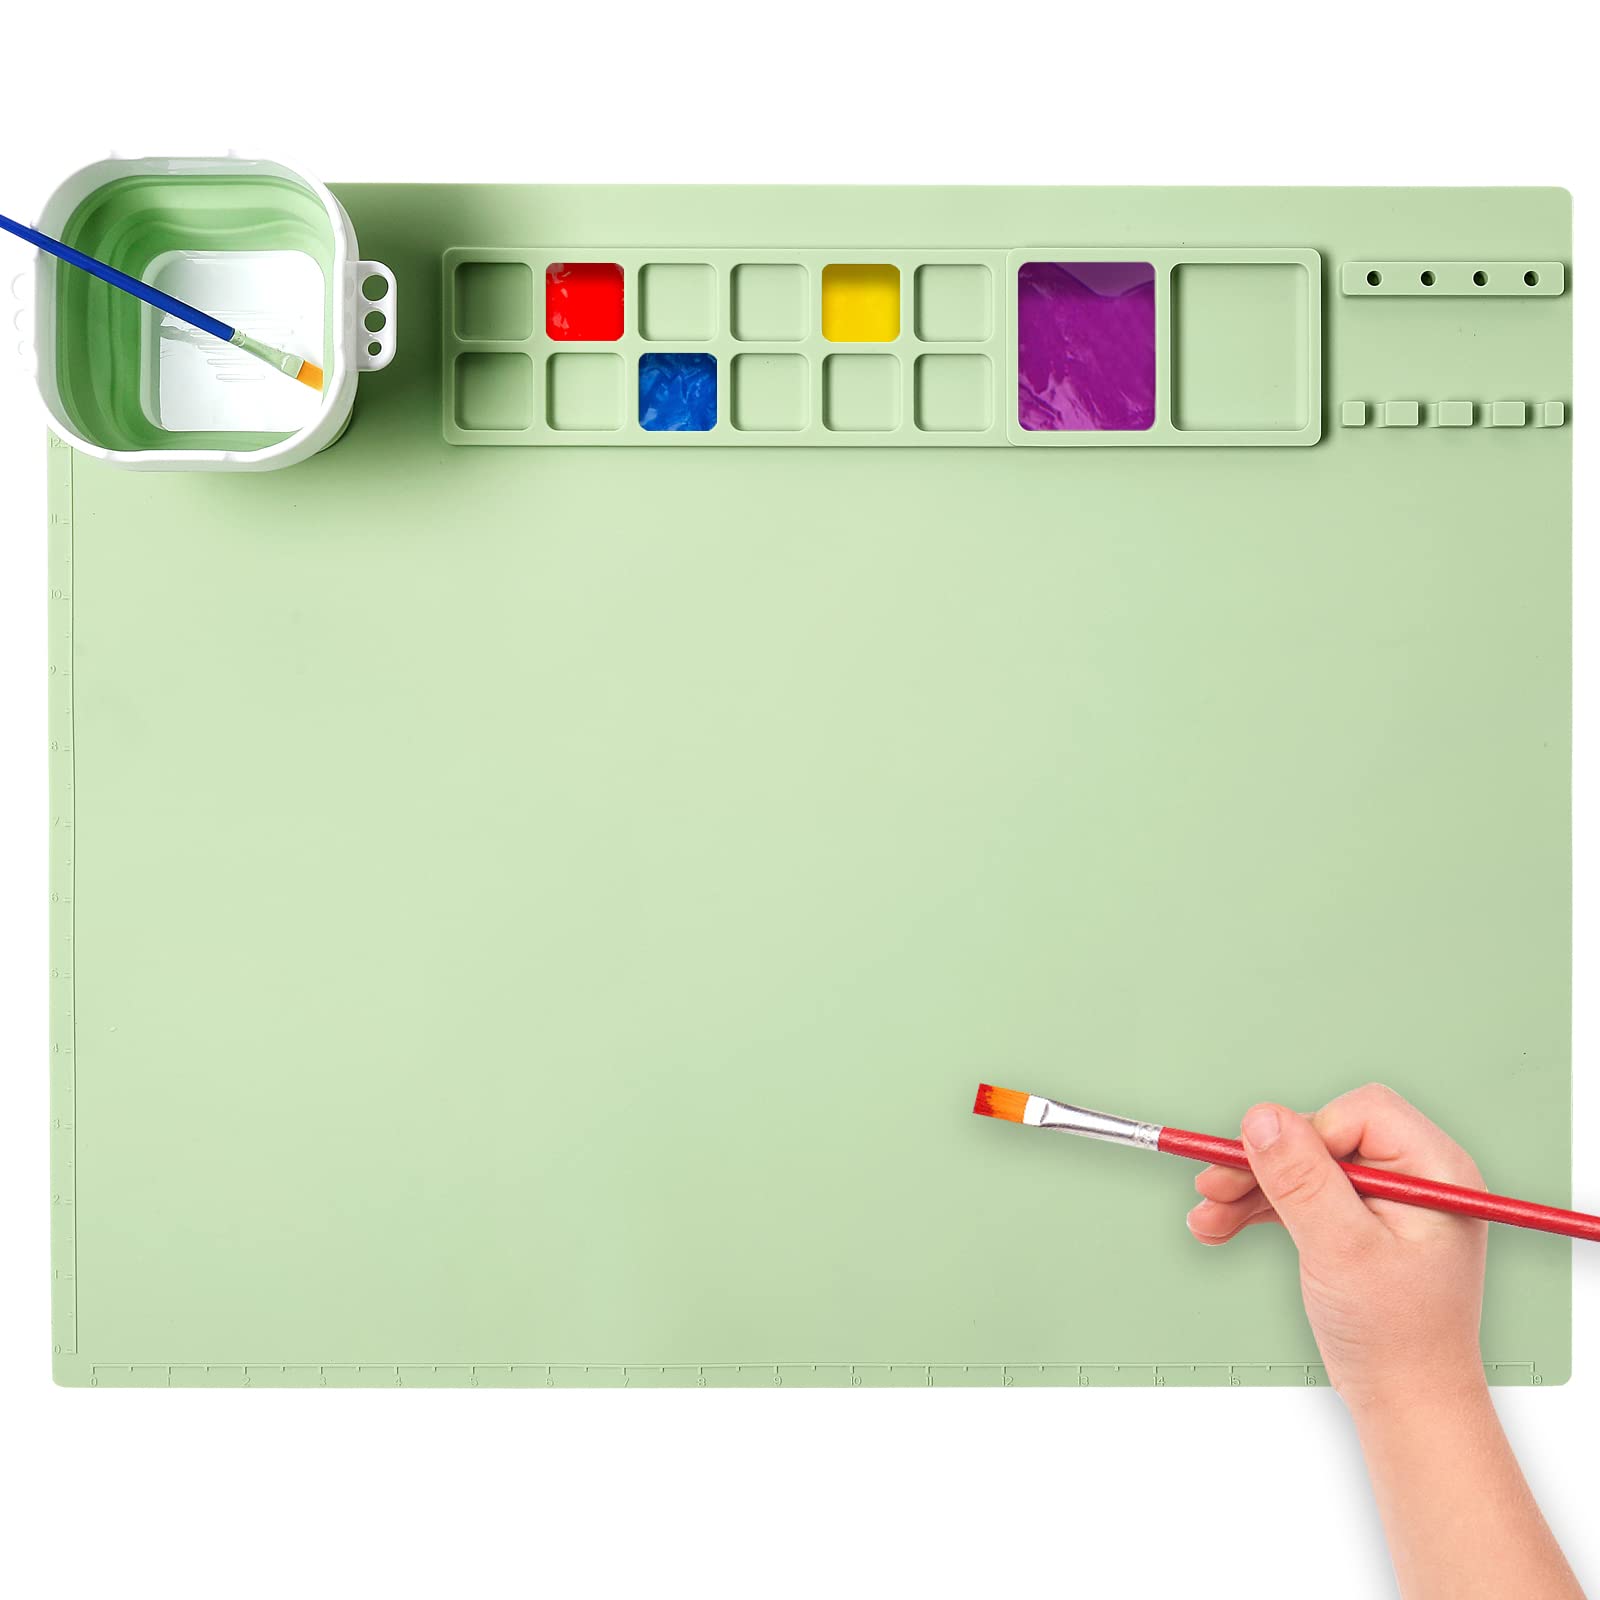 AWOKE Silicone Painting Mat - 20X16 Silicone Art Mat with 1 Water Cup for  Kids - Silcone Craft Mat has12 Color Dividers - 2 Paint Dividers (Green)